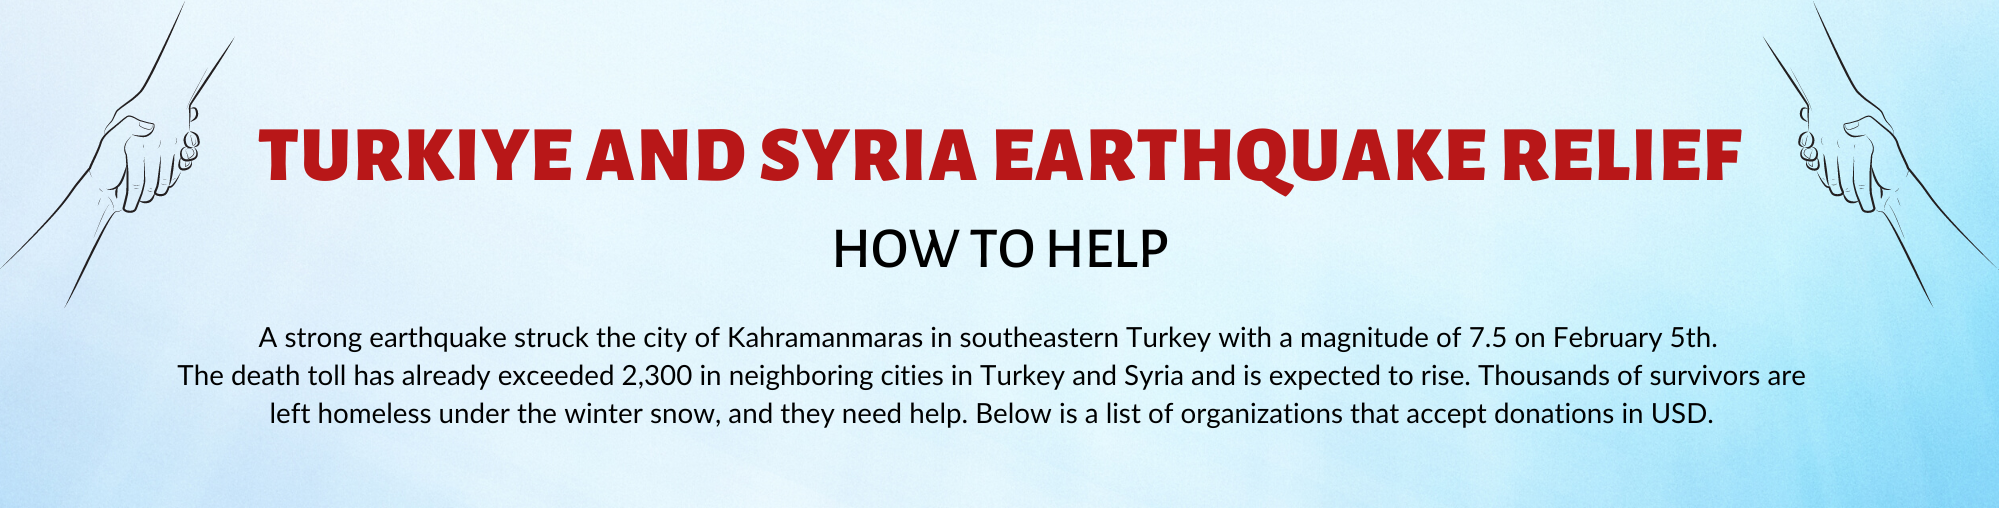 Turkiye and Syria Earthquake Relief: How to Help. A strong earthquake struck the city of Kahramanmaras in southeastern Turkey with a magnitude of 7.5 on February 5th.  The death toll has already exceeded 2,300 in neighboring cities in Turkey and Syria and is expected to rise. Thousands of survivors are left homeless under the winter snow, and they need help. Below is a list of organizations that accept donations in USD.